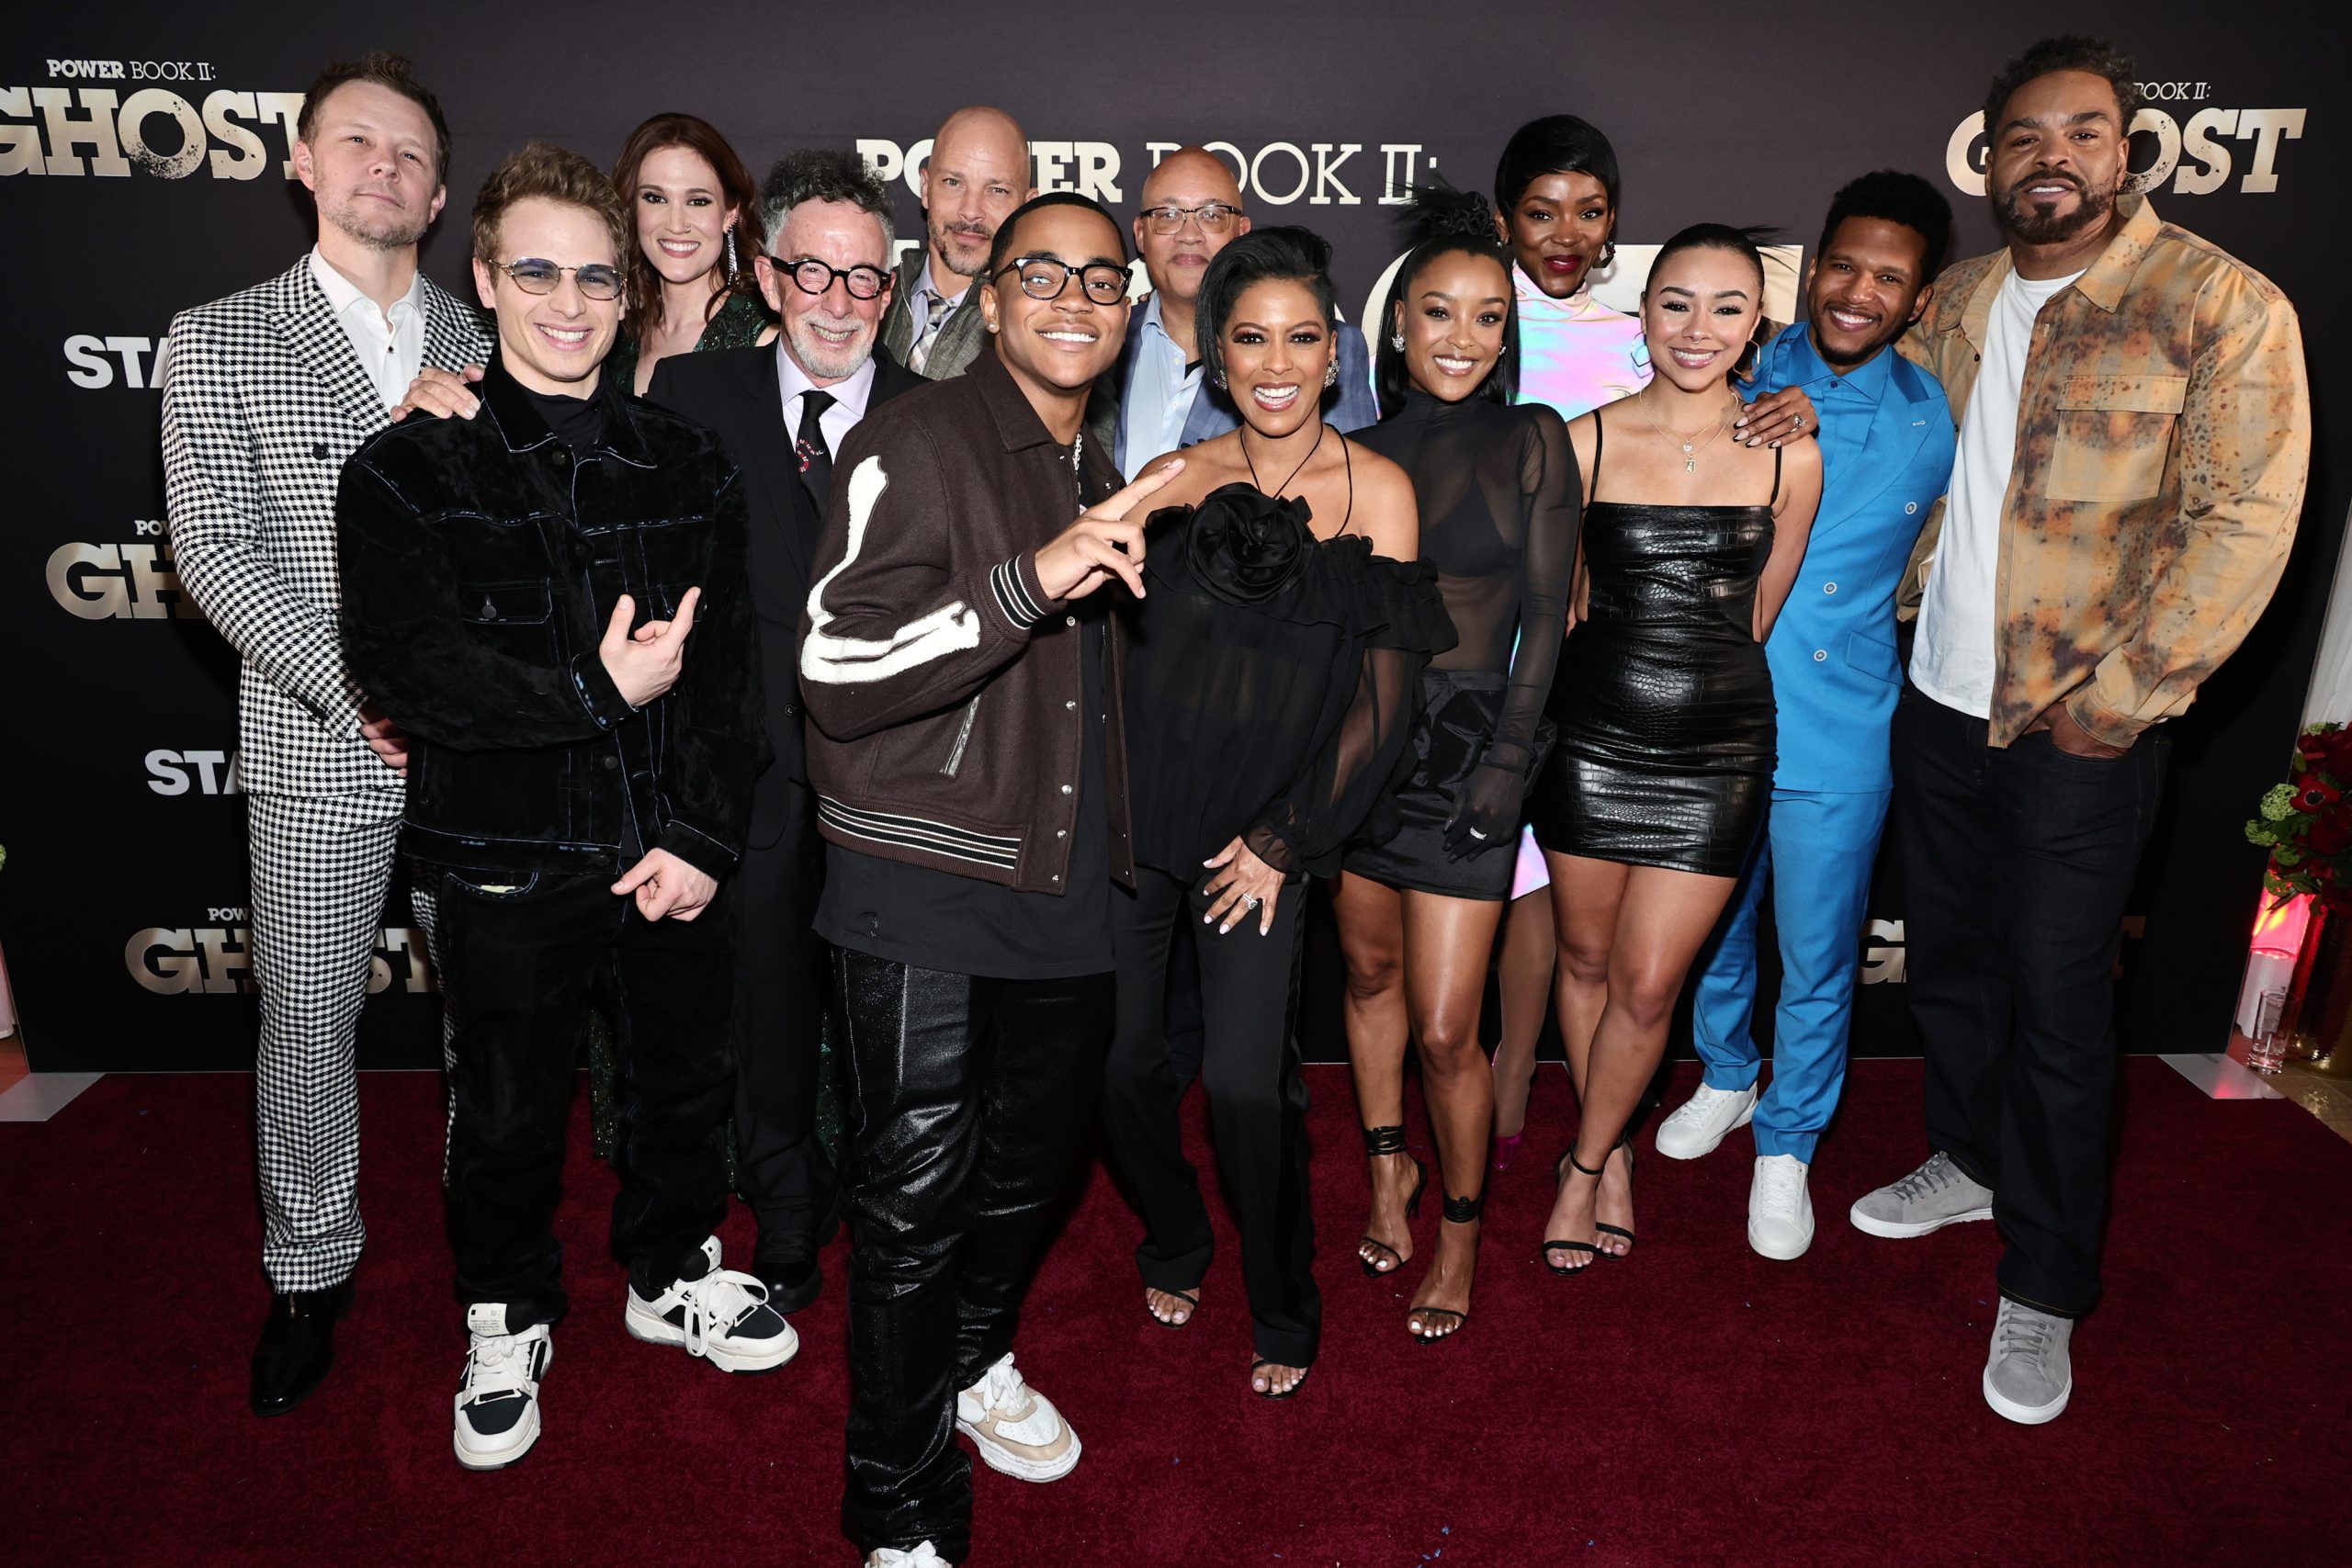 Cliff “Method Man” Smith, Michael Rainey Jr., Larenz Tate & More Attend STARZ’s Celebration For “Power Book II: Ghost” S3 Hosted by Tamron Hall